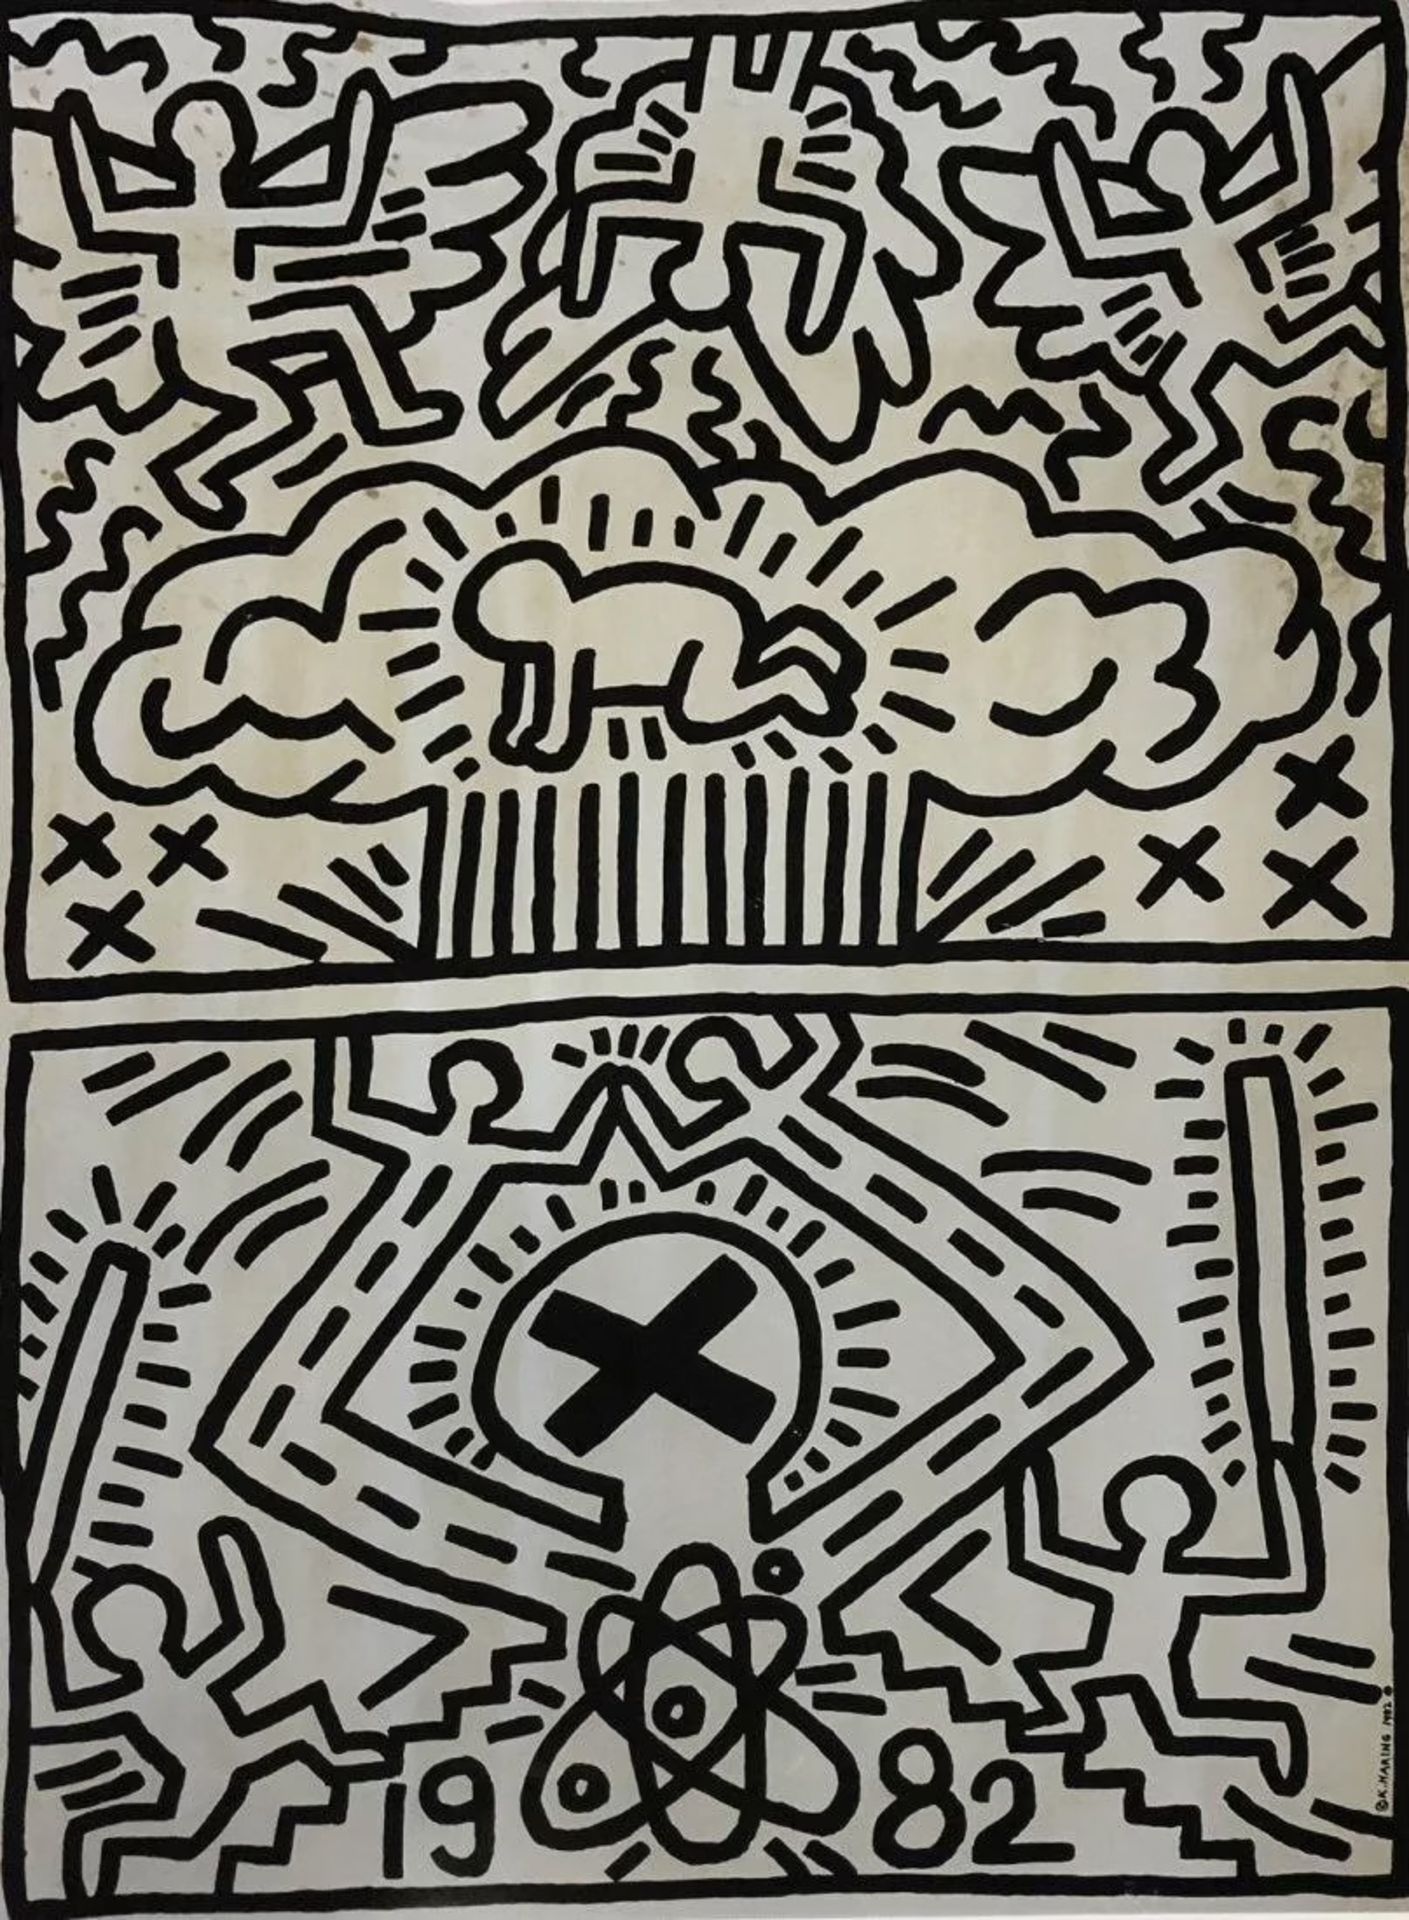 Keith Haring - Nuclear Disarmament Poster